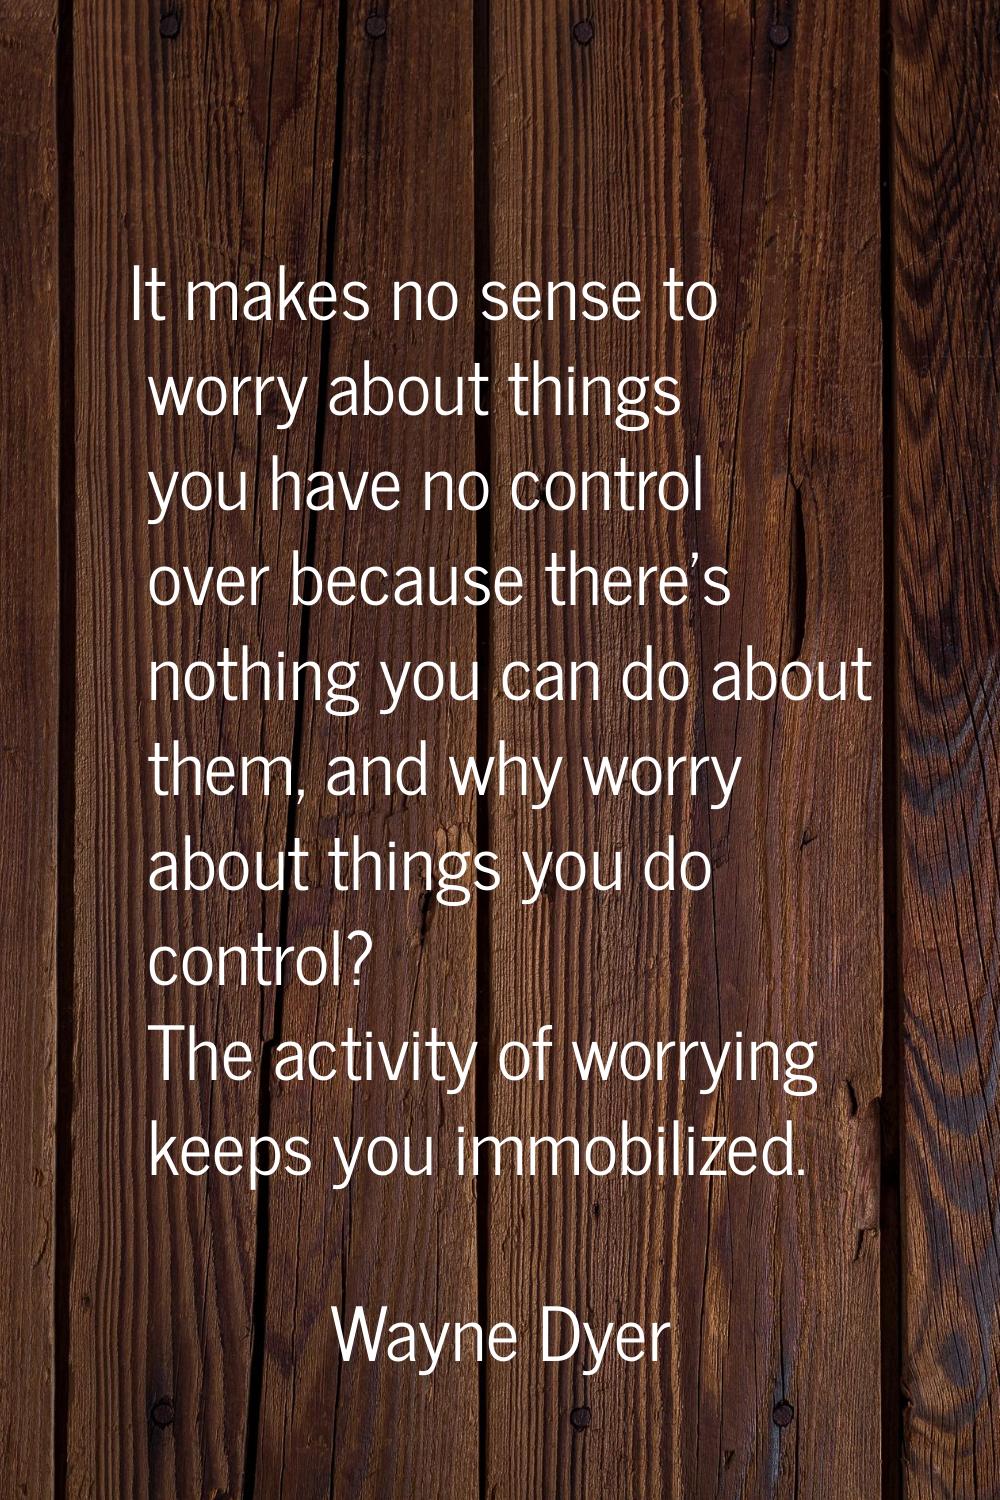 It makes no sense to worry about things you have no control over because there's nothing you can do